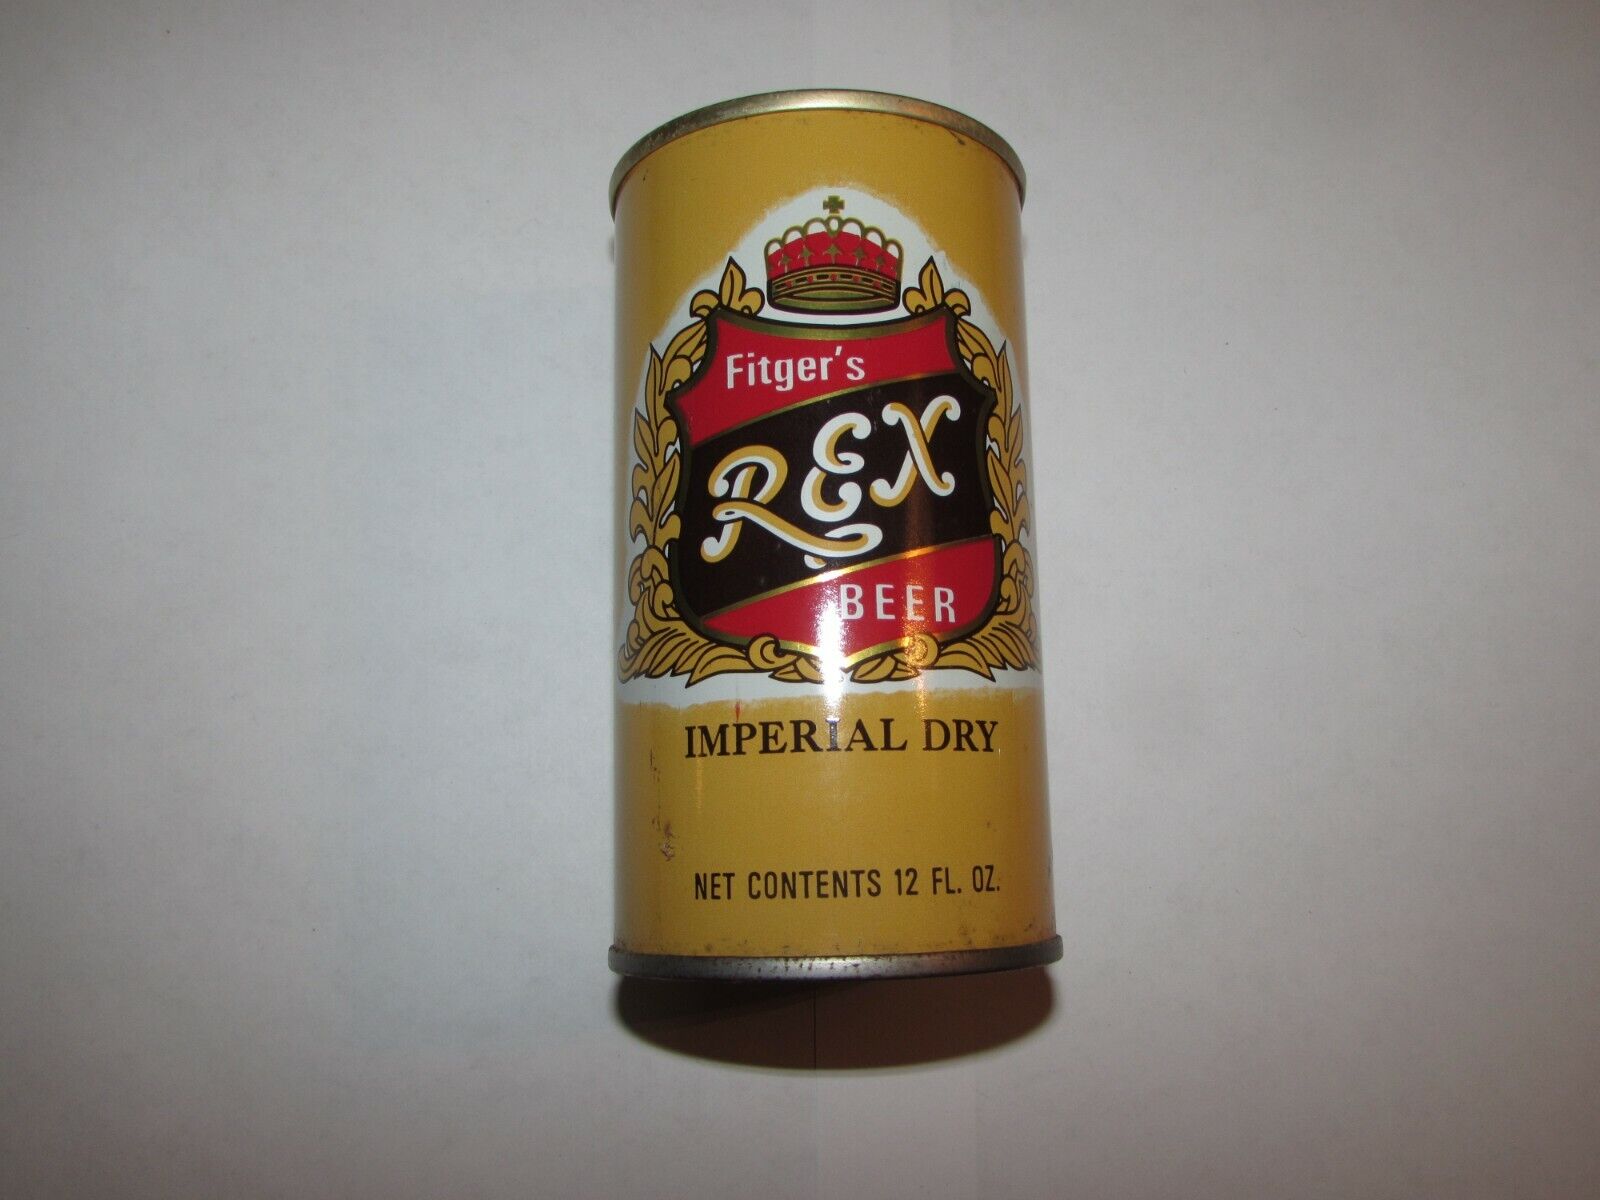 FITGERS REX IMPERIAL STRAIGHT STEEL PULL TAB BEER CAN DULUTH, MINNESOTA